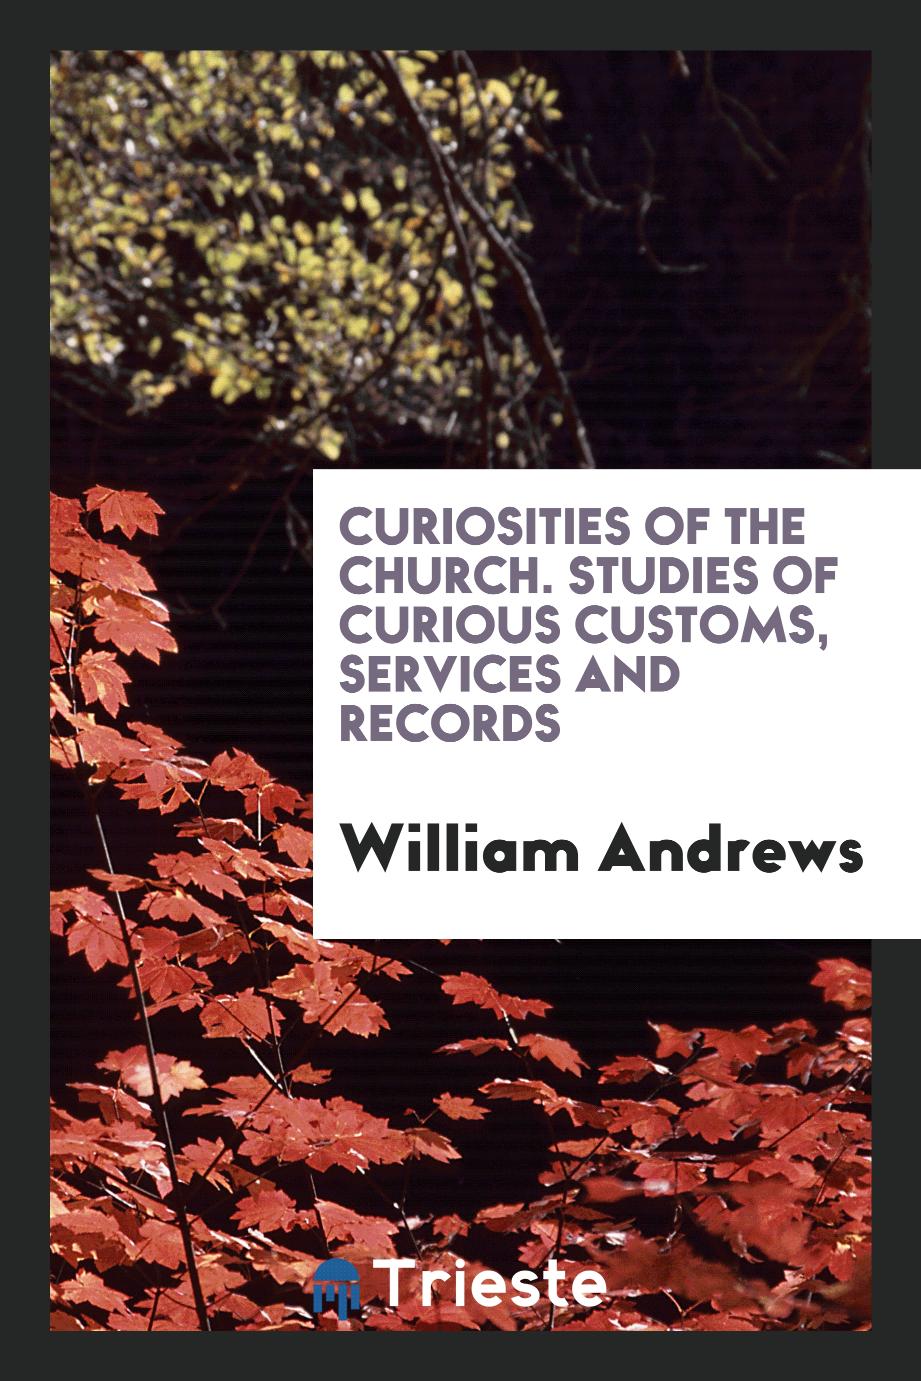 Curiosities of the church. Studies of curious customs, services and records